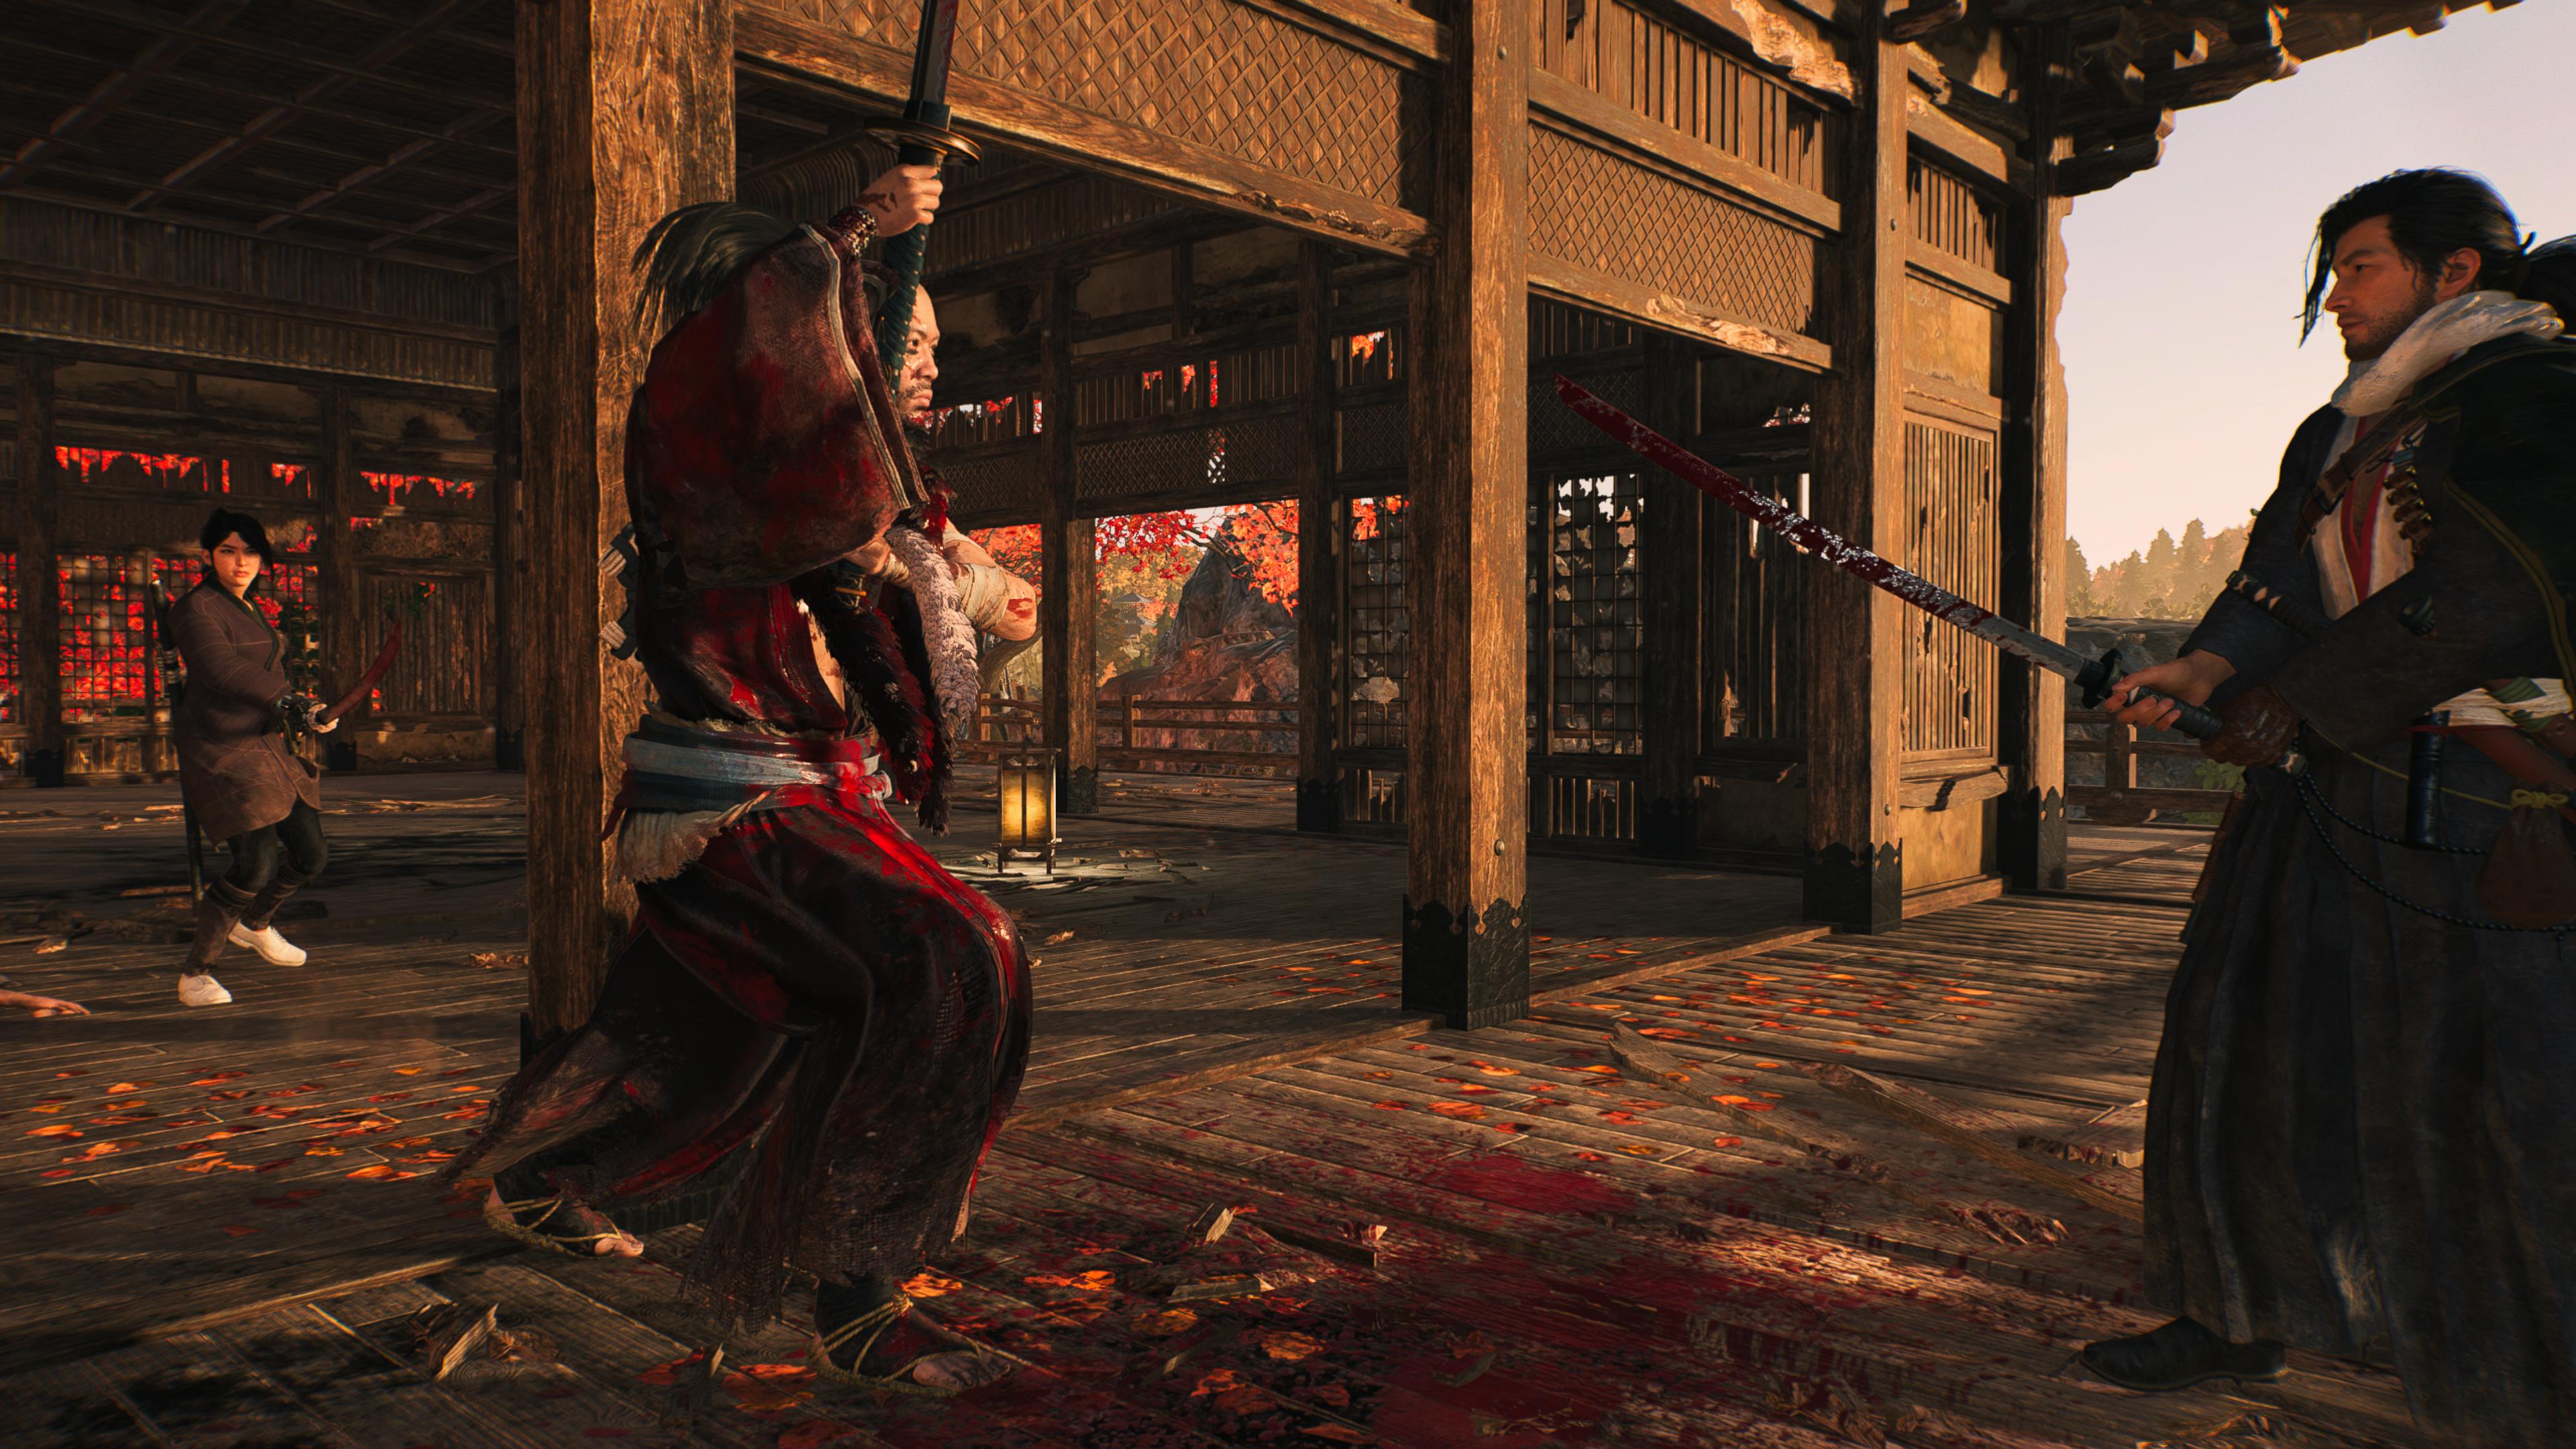 Reseña: Rise of the Ronin, ¿Vale la pena? 22